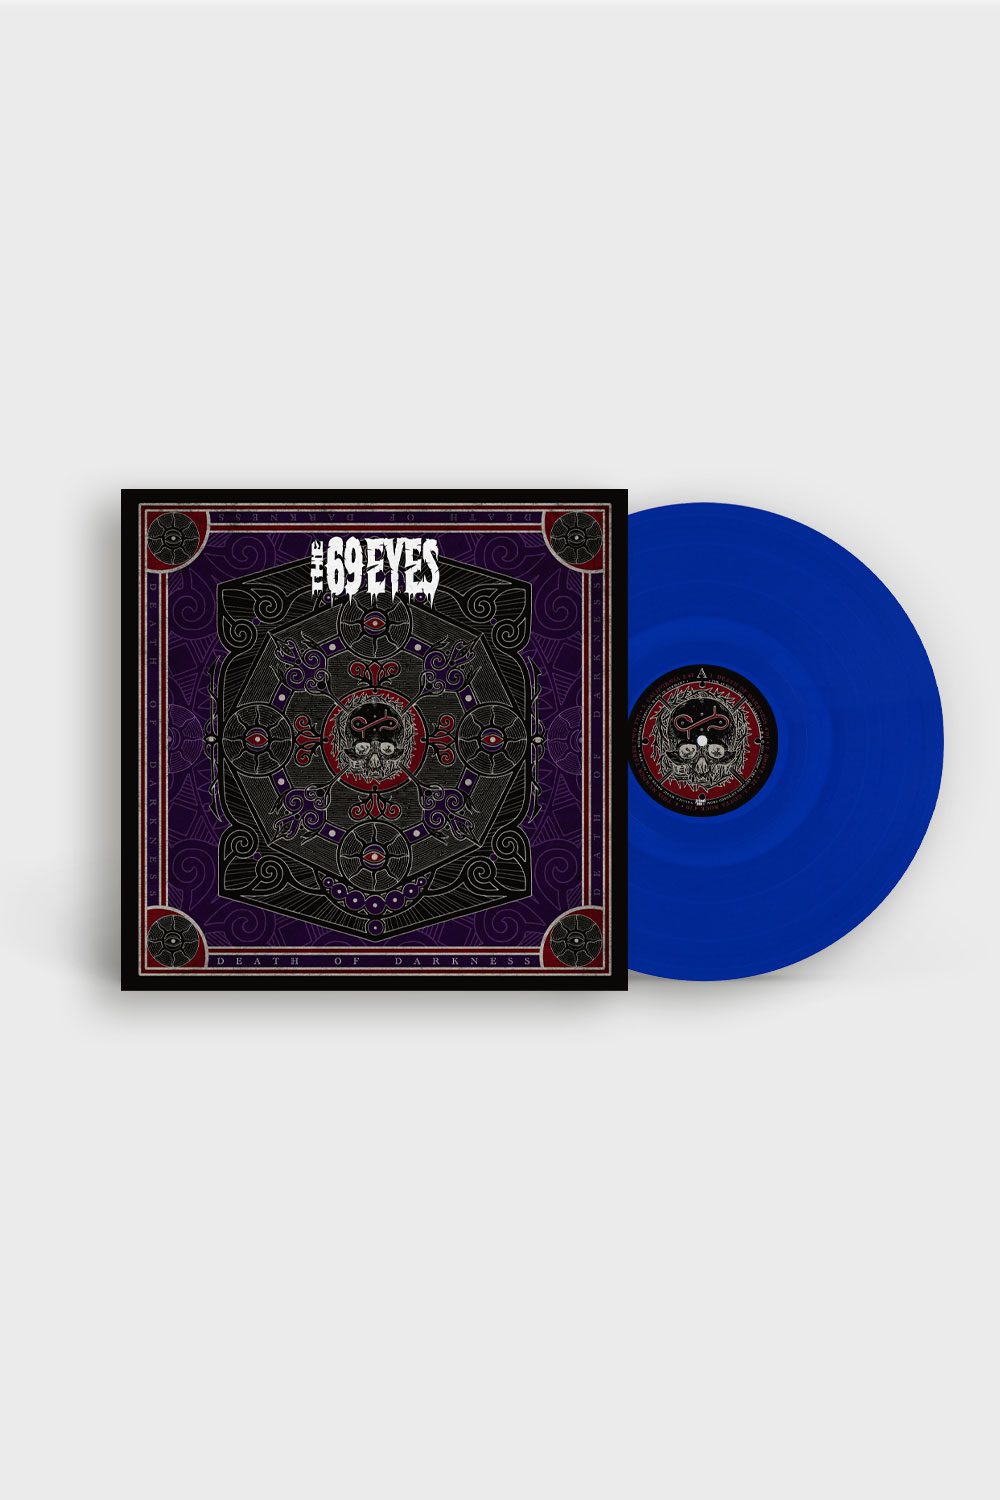 https://www.visionmerch.com/wp-content/uploads/2023/02/4251981703435_The69Eyes_Death-Of-Darkness_LP_blue90_clear10_1000x1500.jpg